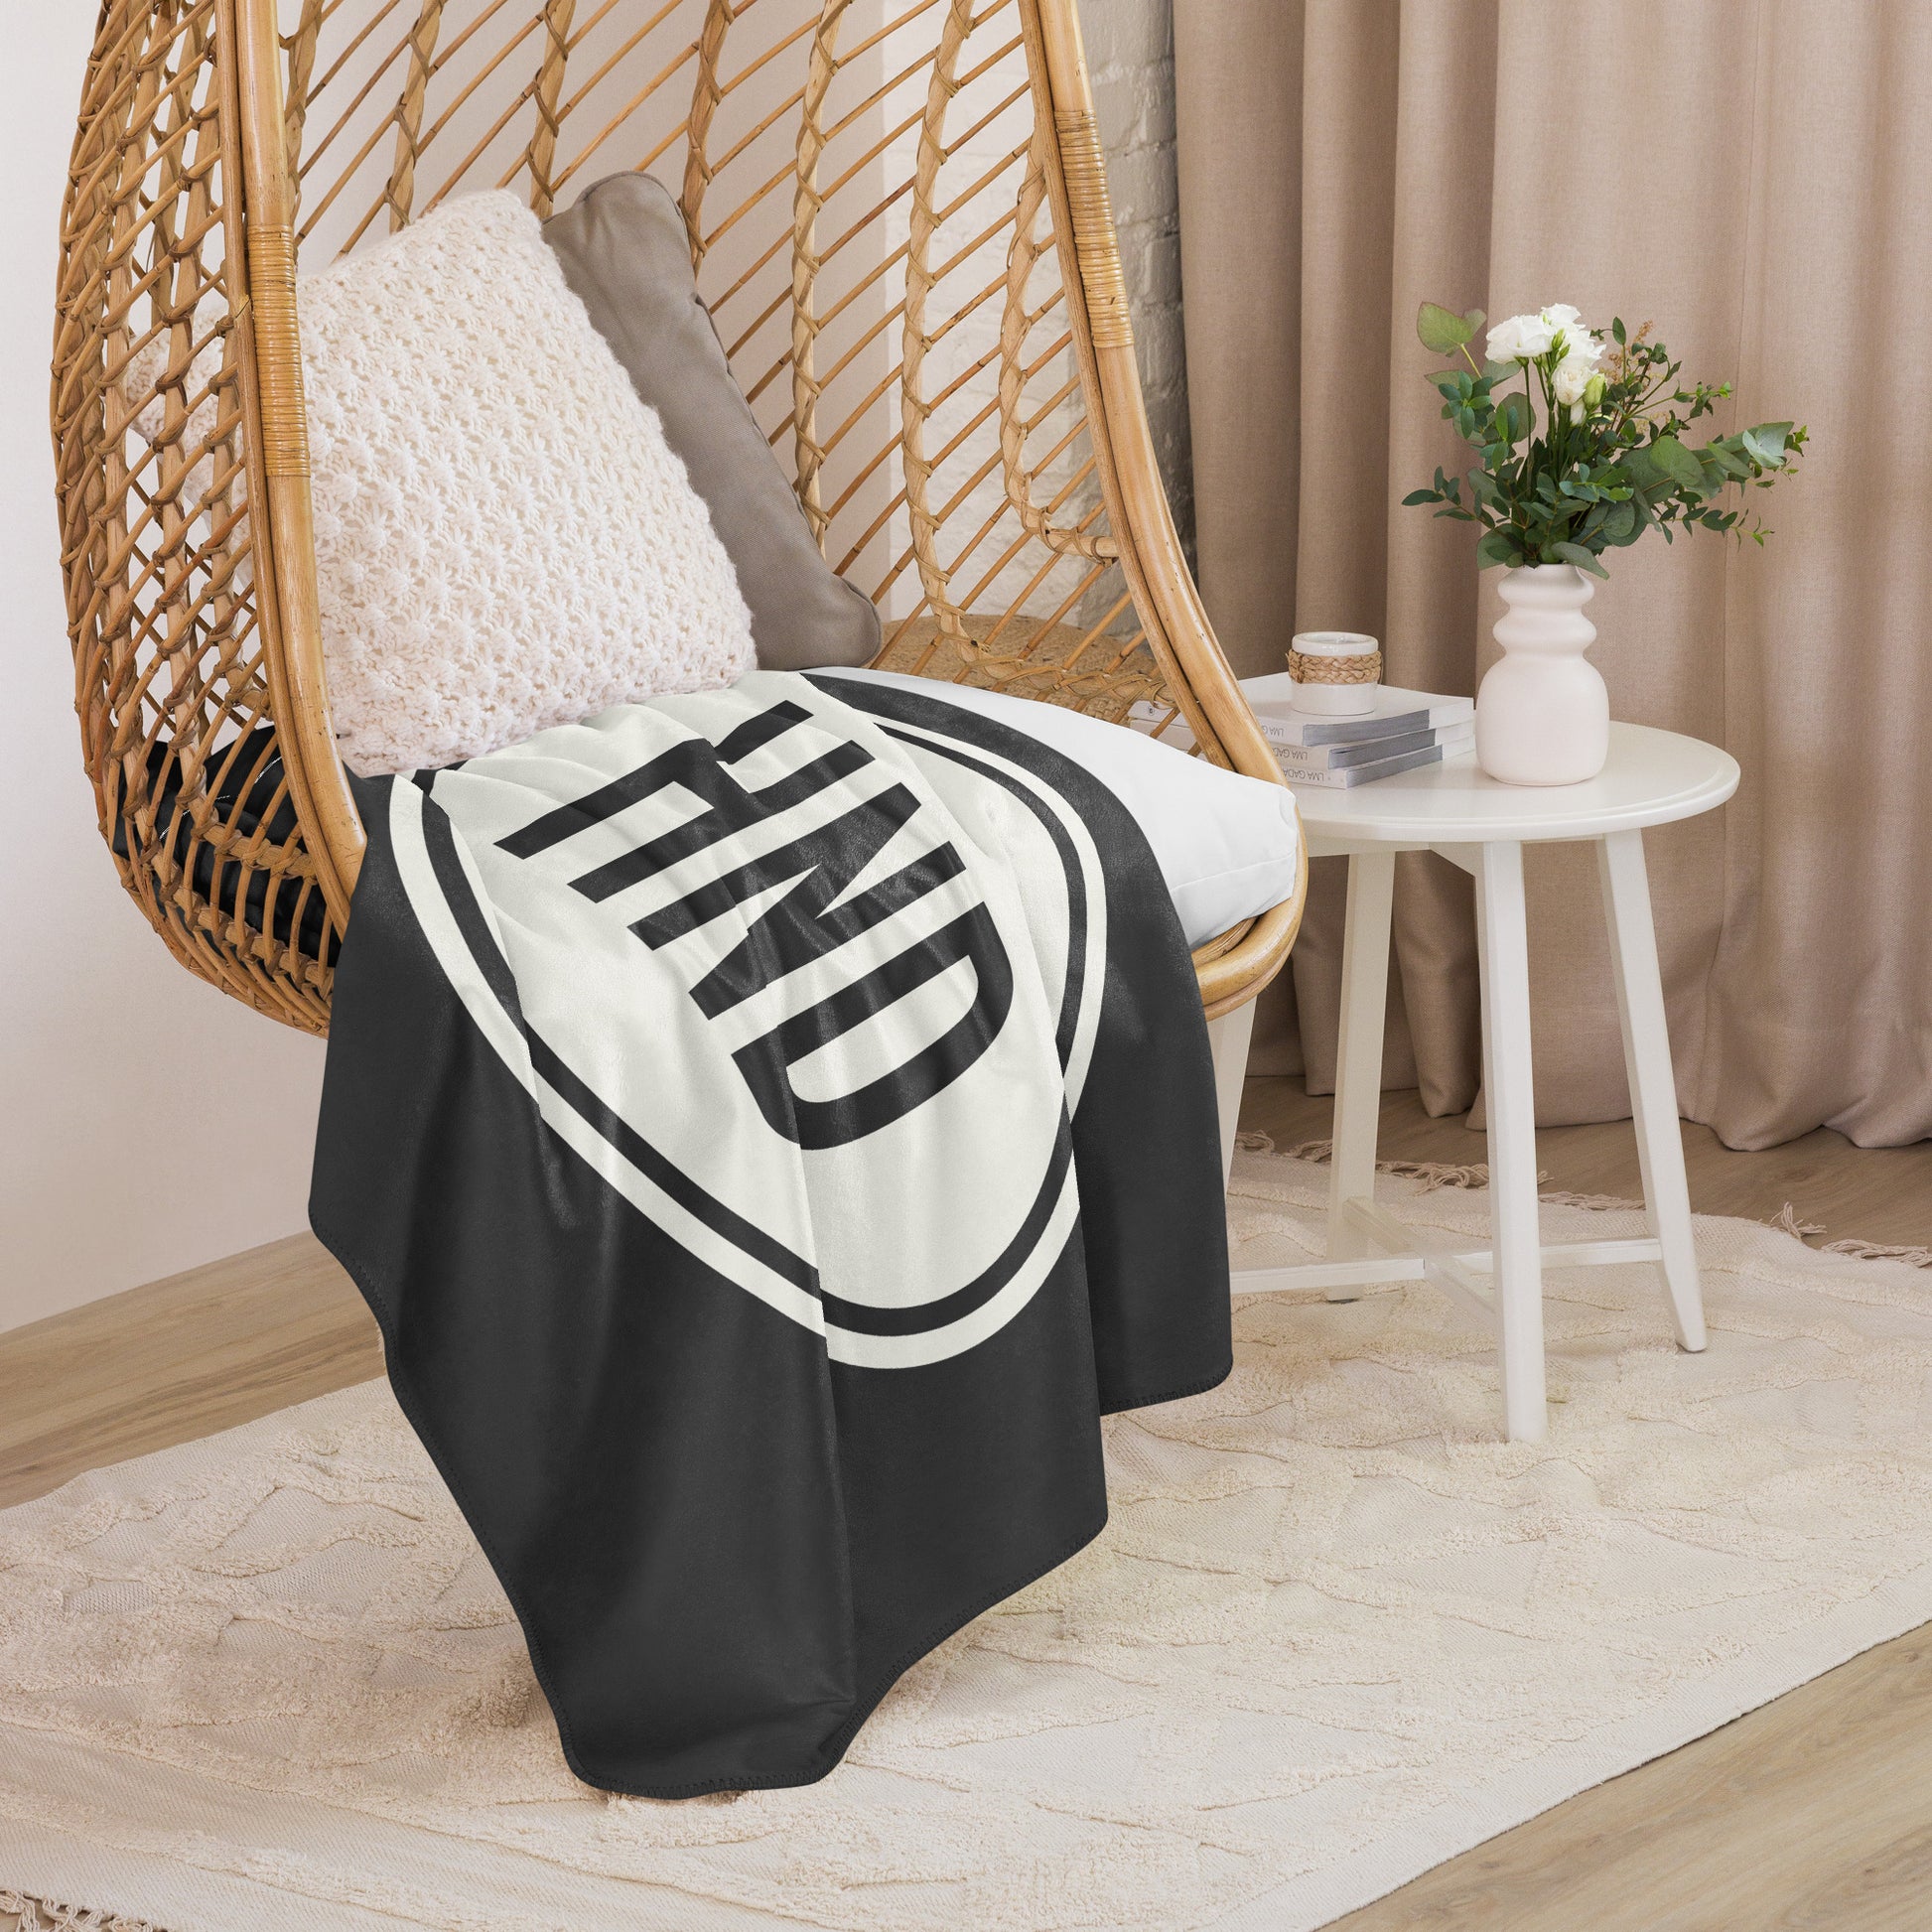 Unique Travel Gift Sherpa Blanket - White Oval • HND Tokyo • YHM Designs - Image 06